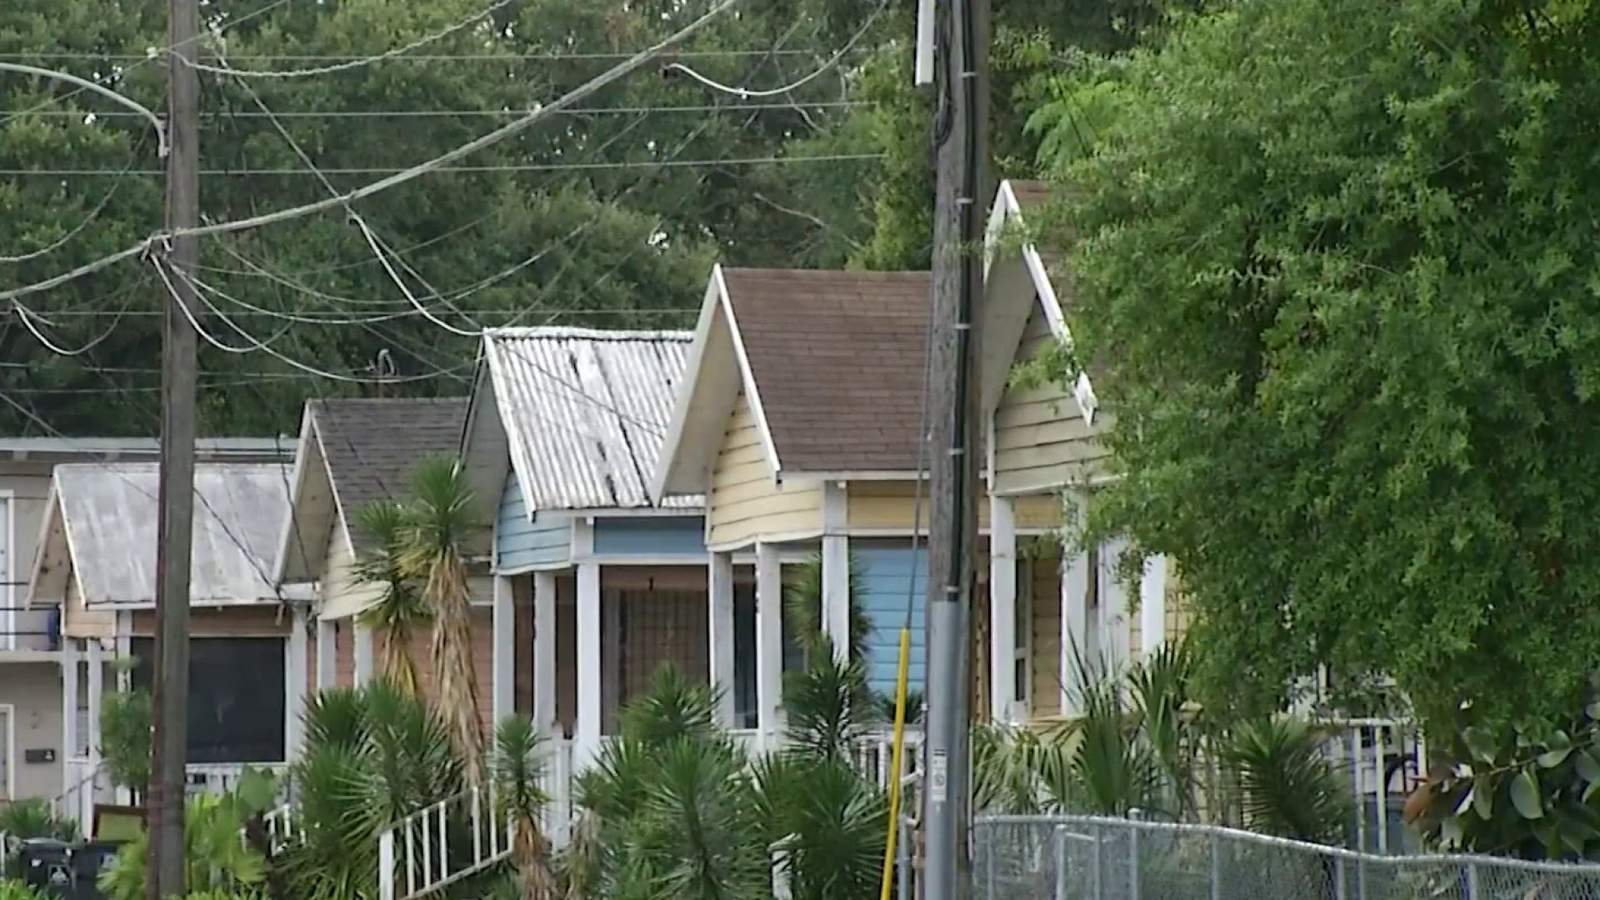 Parramore residents want to preserve history as area grows